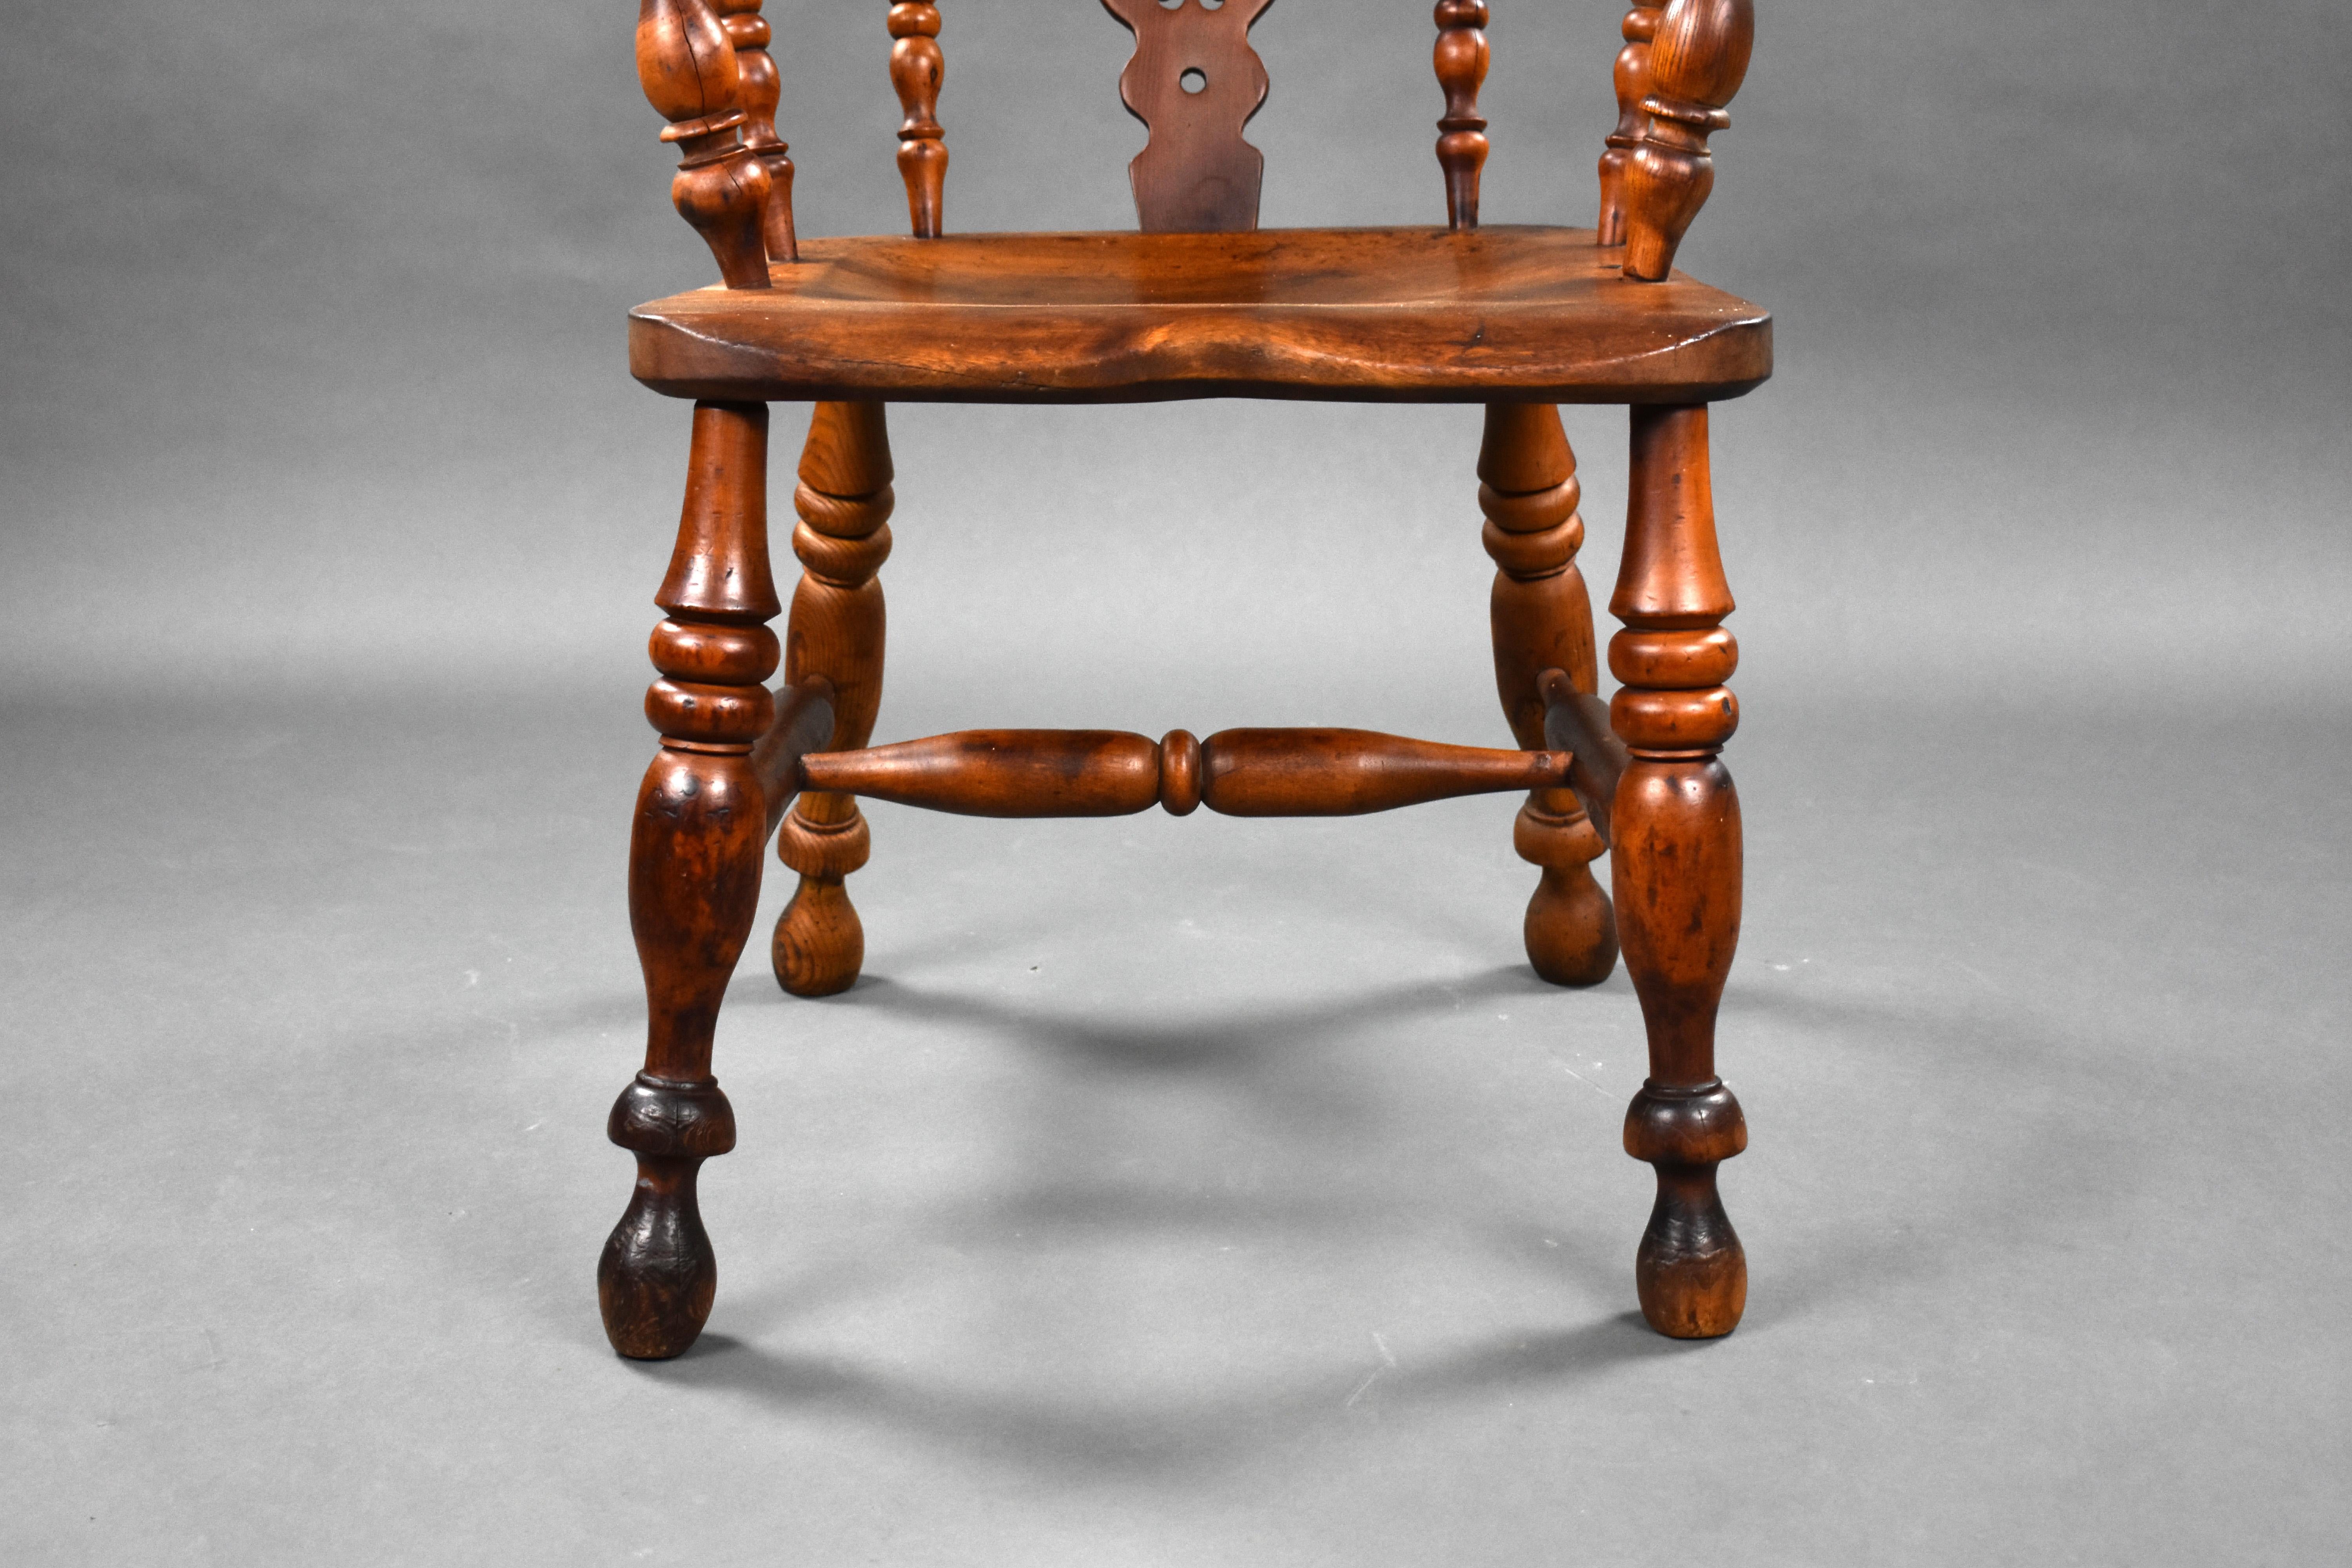 19th Century English Yew Wood High Back Broad Arm Windsor Chair For Sale 5